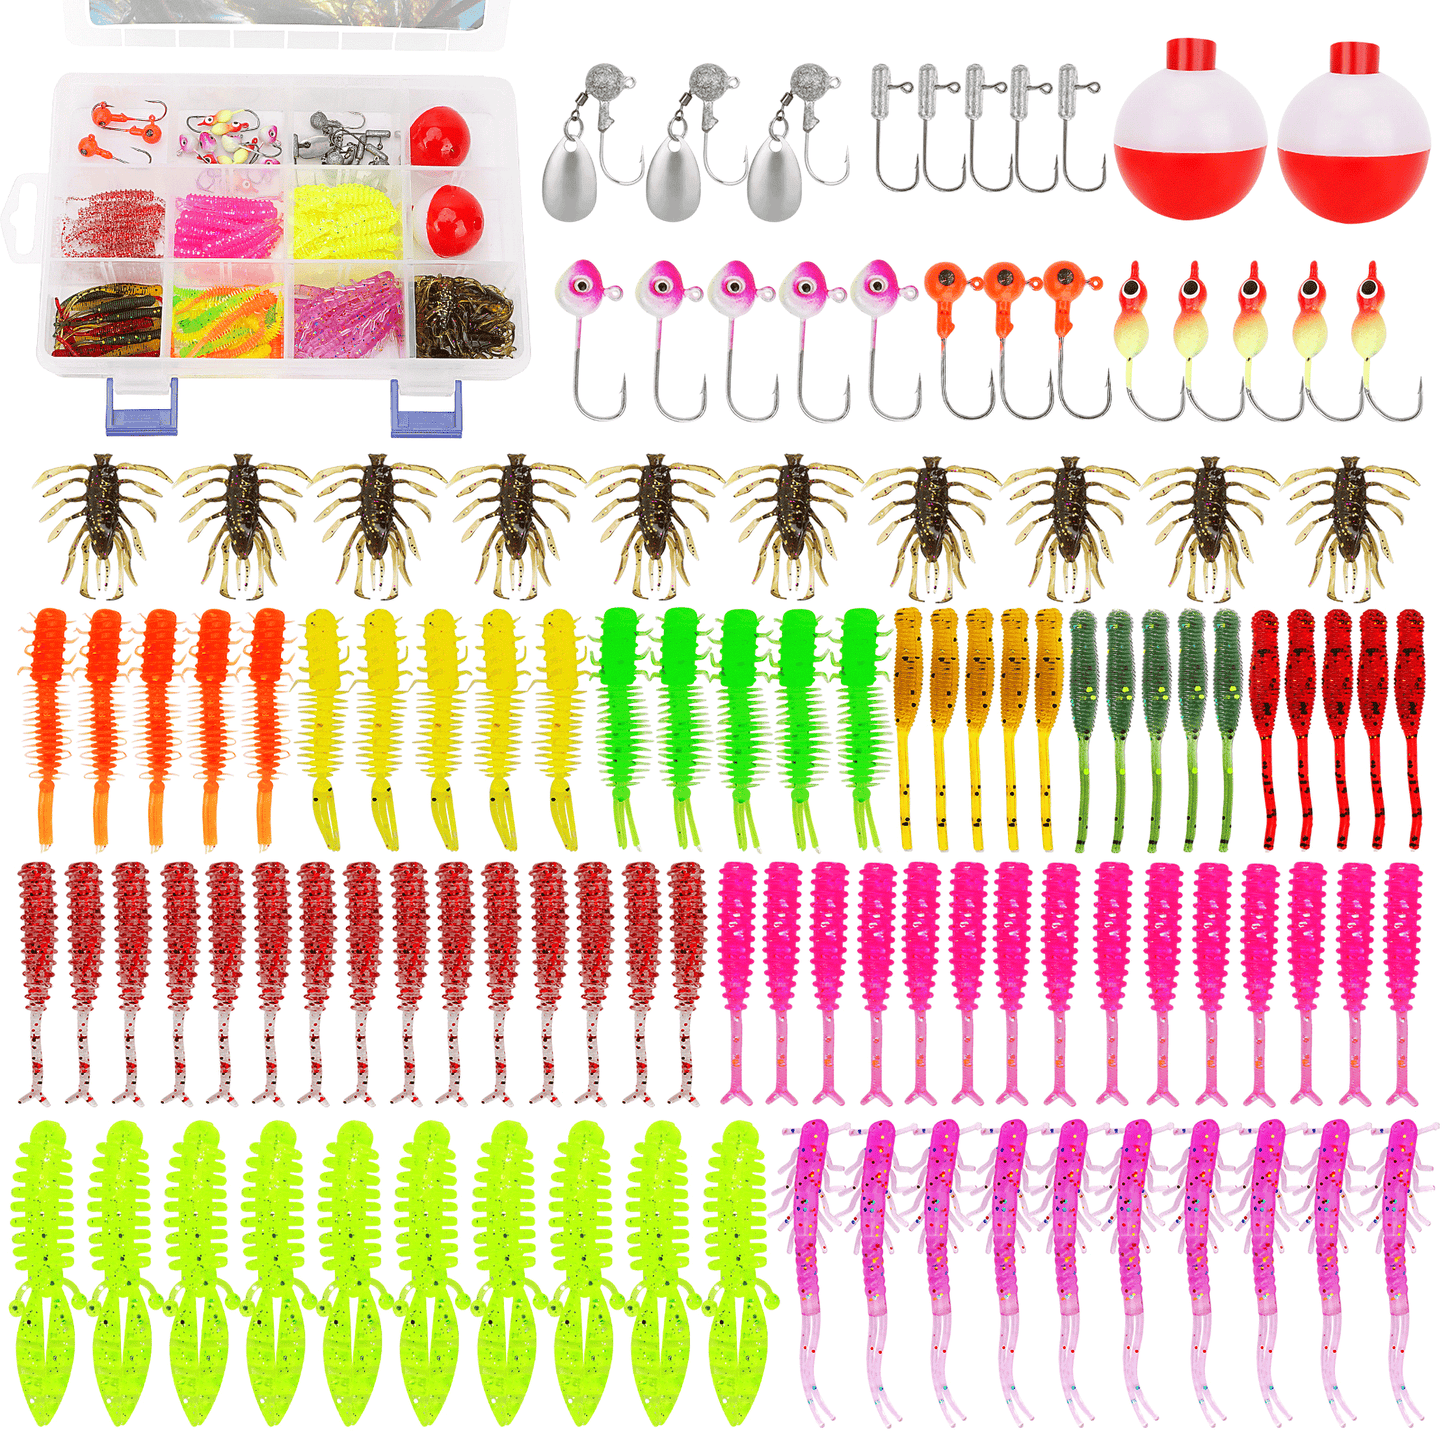 Fishing Lures Tackle Box Trout & Crappie Ice Fishing Gear Kit, Including Jig Heads,Soft Plastic baits for Panfish,Bluegill, Bass etc Freshwater Fishing Equipment